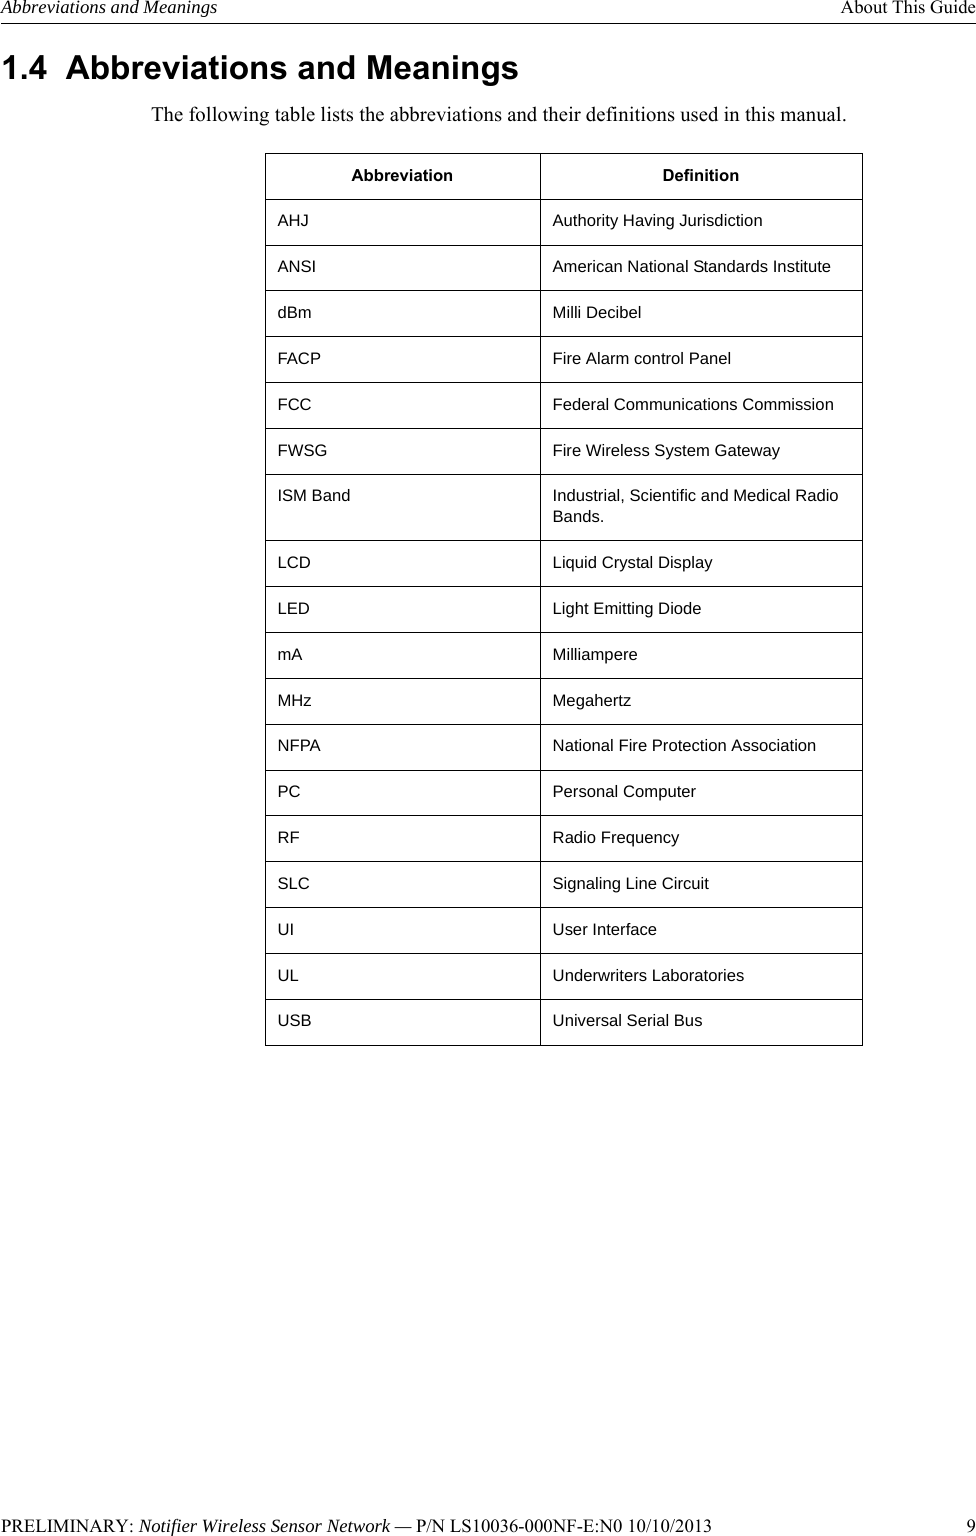 PRELIMINARY: Notifier Wireless Sensor Network — P/N LS10036-000NF-E:N0 10/10/2013   9Abbreviations and Meanings About This Guide1.4  Abbreviations and MeaningsThe following table lists the abbreviations and their definitions used in this manual.Abbreviation DefinitionAHJ Authority Having JurisdictionANSI American National Standards InstitutedBm Milli DecibelFACP Fire Alarm control PanelFCC Federal Communications CommissionFWSG Fire Wireless System GatewayISM Band Industrial, Scientific and Medical Radio Bands.LCD Liquid Crystal DisplayLED Light Emitting DiodemA MilliampereMHz MegahertzNFPA National Fire Protection AssociationPC Personal ComputerRF Radio FrequencySLC Signaling Line CircuitUI User InterfaceUL Underwriters LaboratoriesUSB Universal Serial Bus